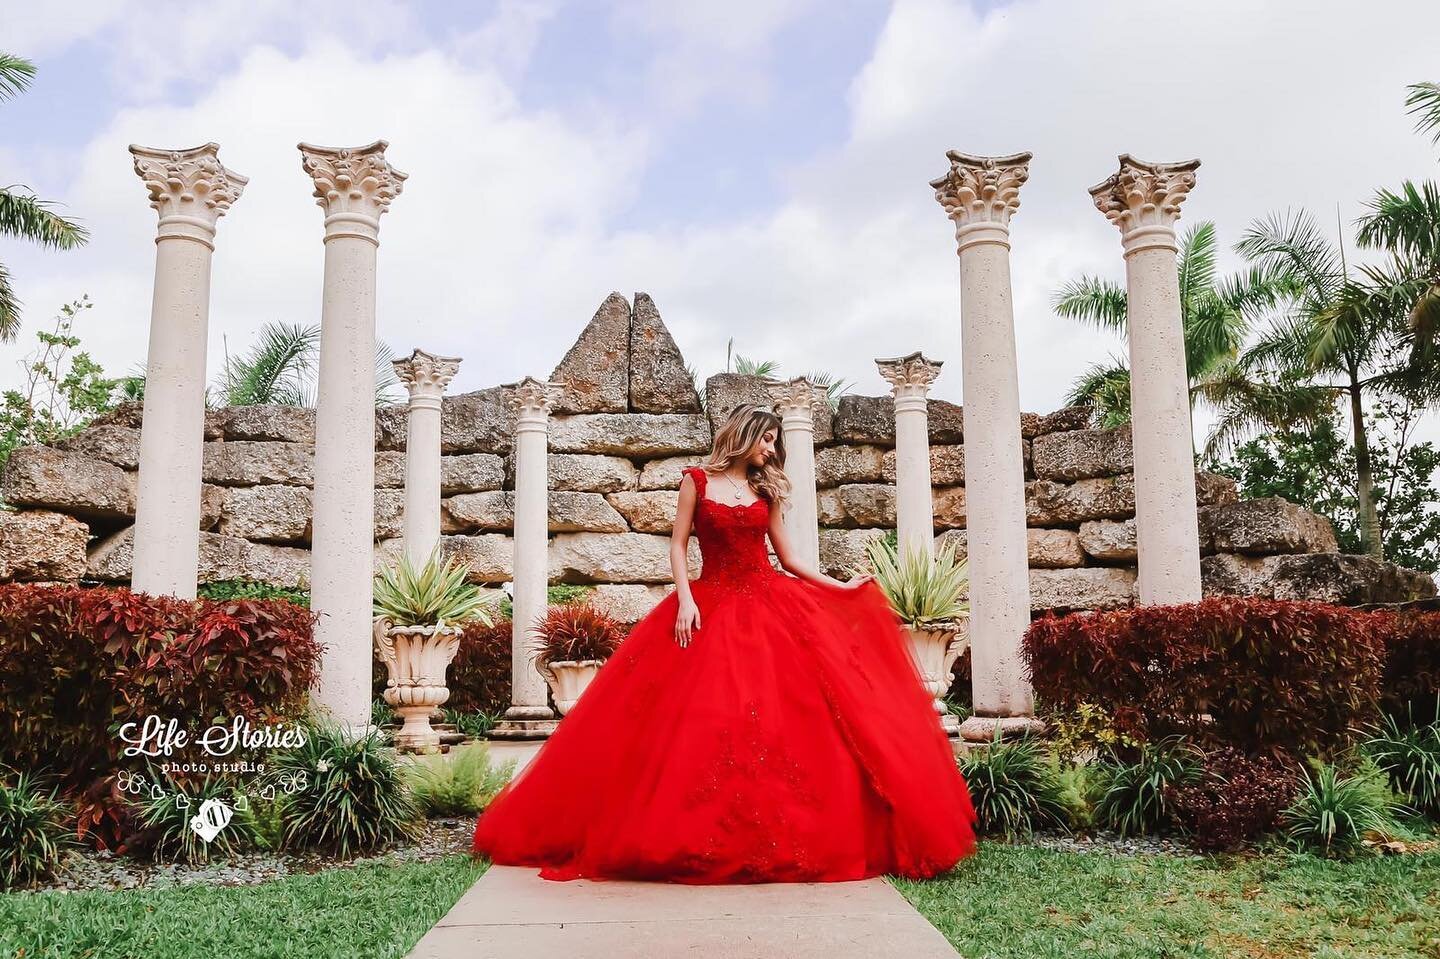 you can never go wrong with red ❤️
📸: @lifestoriesphotostudio 
&bull;
&bull;
&bull;
&bull;

#quince#quinceañeramiami #quinceañera #quincedress #miami#miamidresses #miamidressrental#southflorida #dresses #gowns #dressrental #quinceañeras #quincean